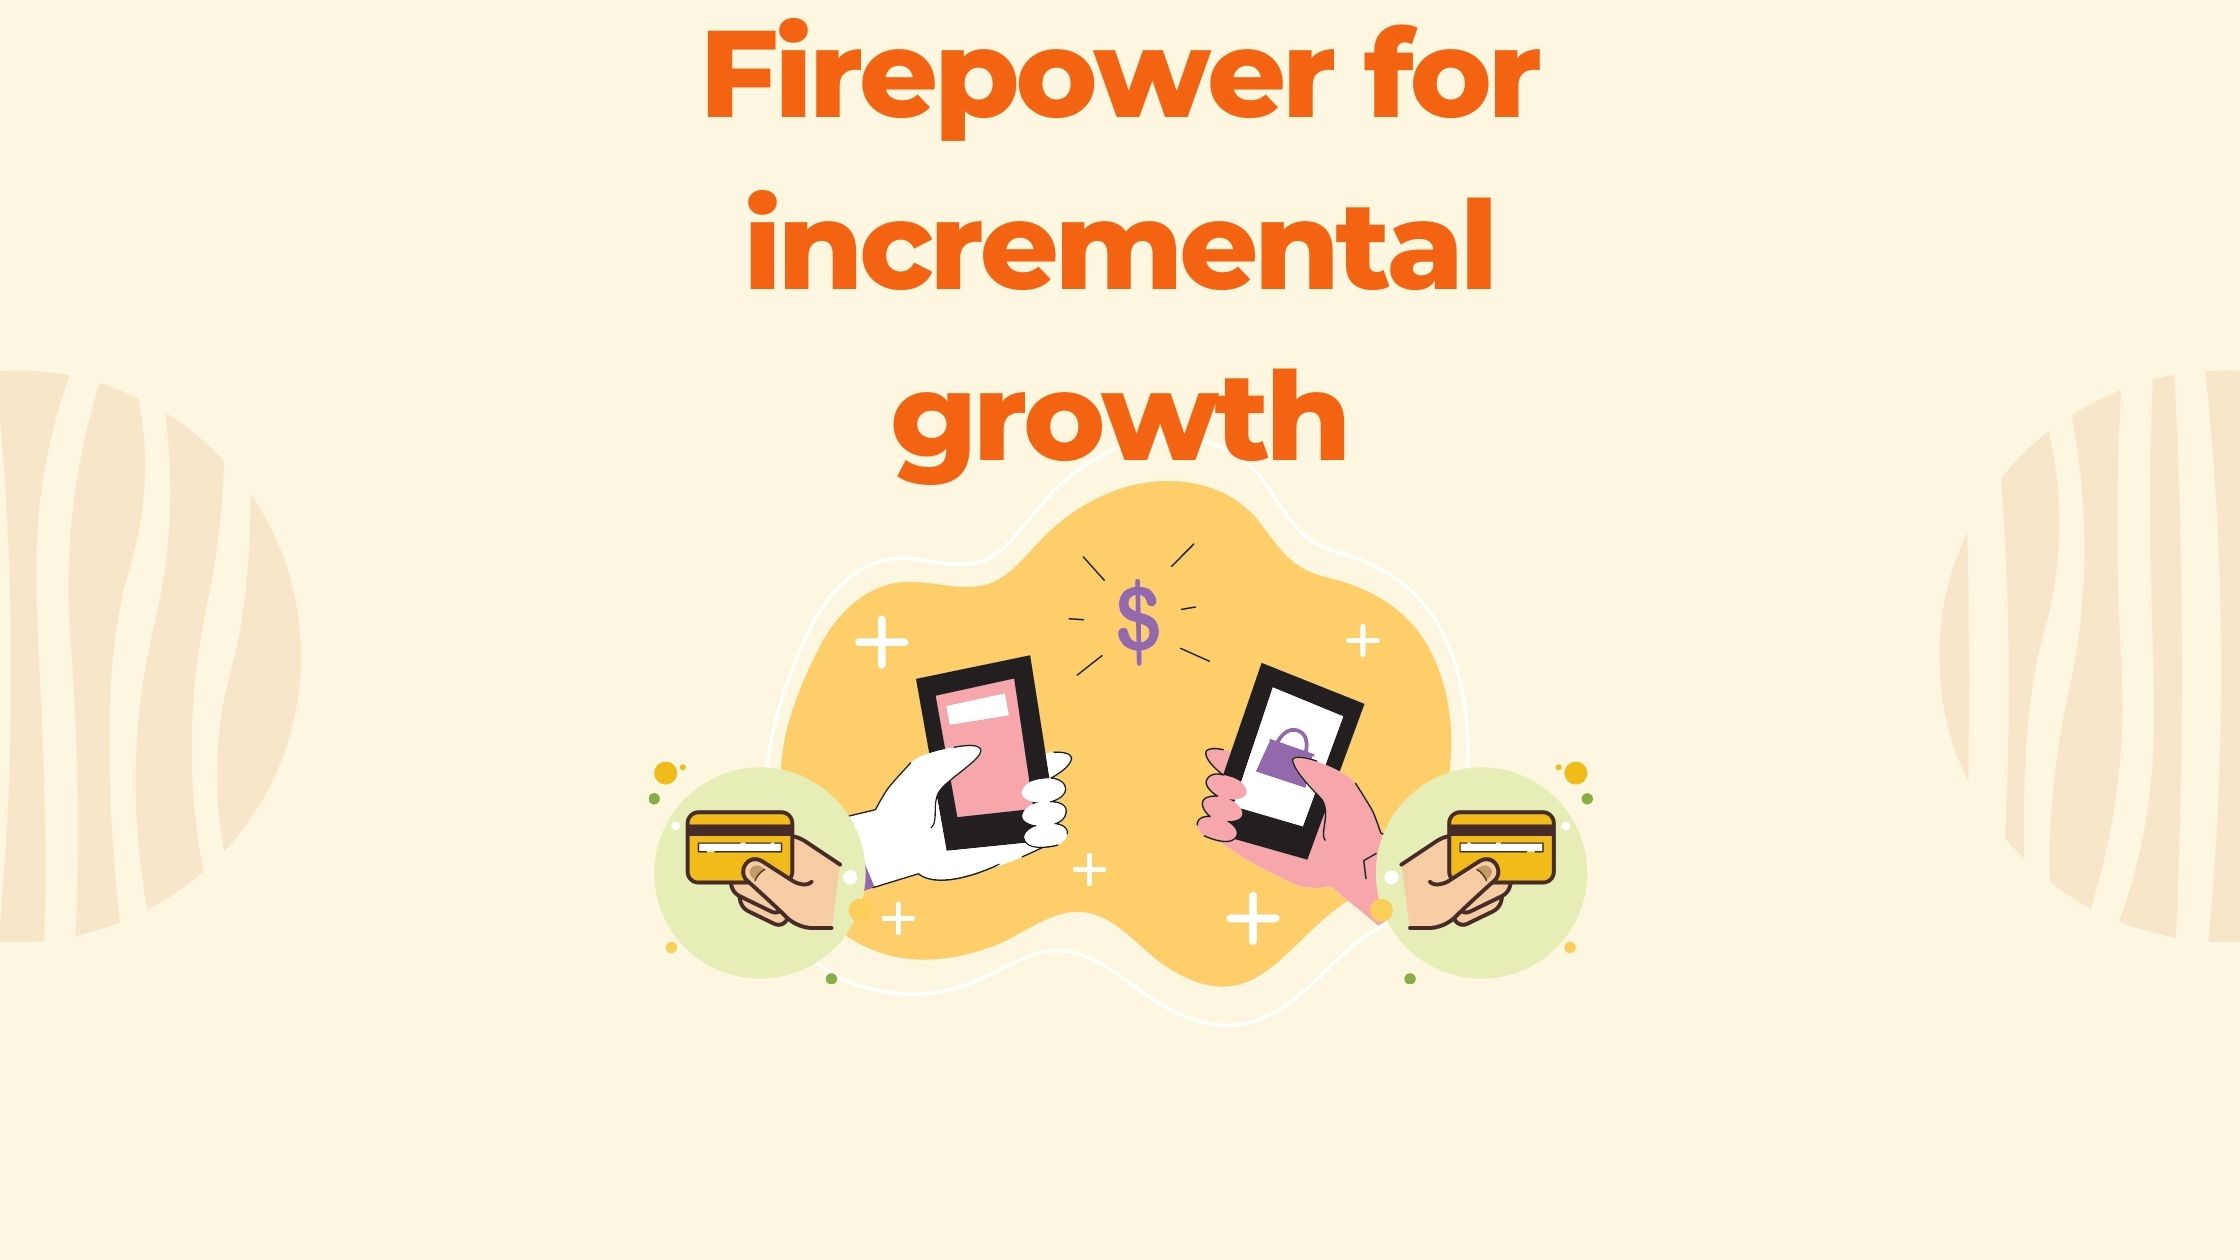 Firepower for incremental growth